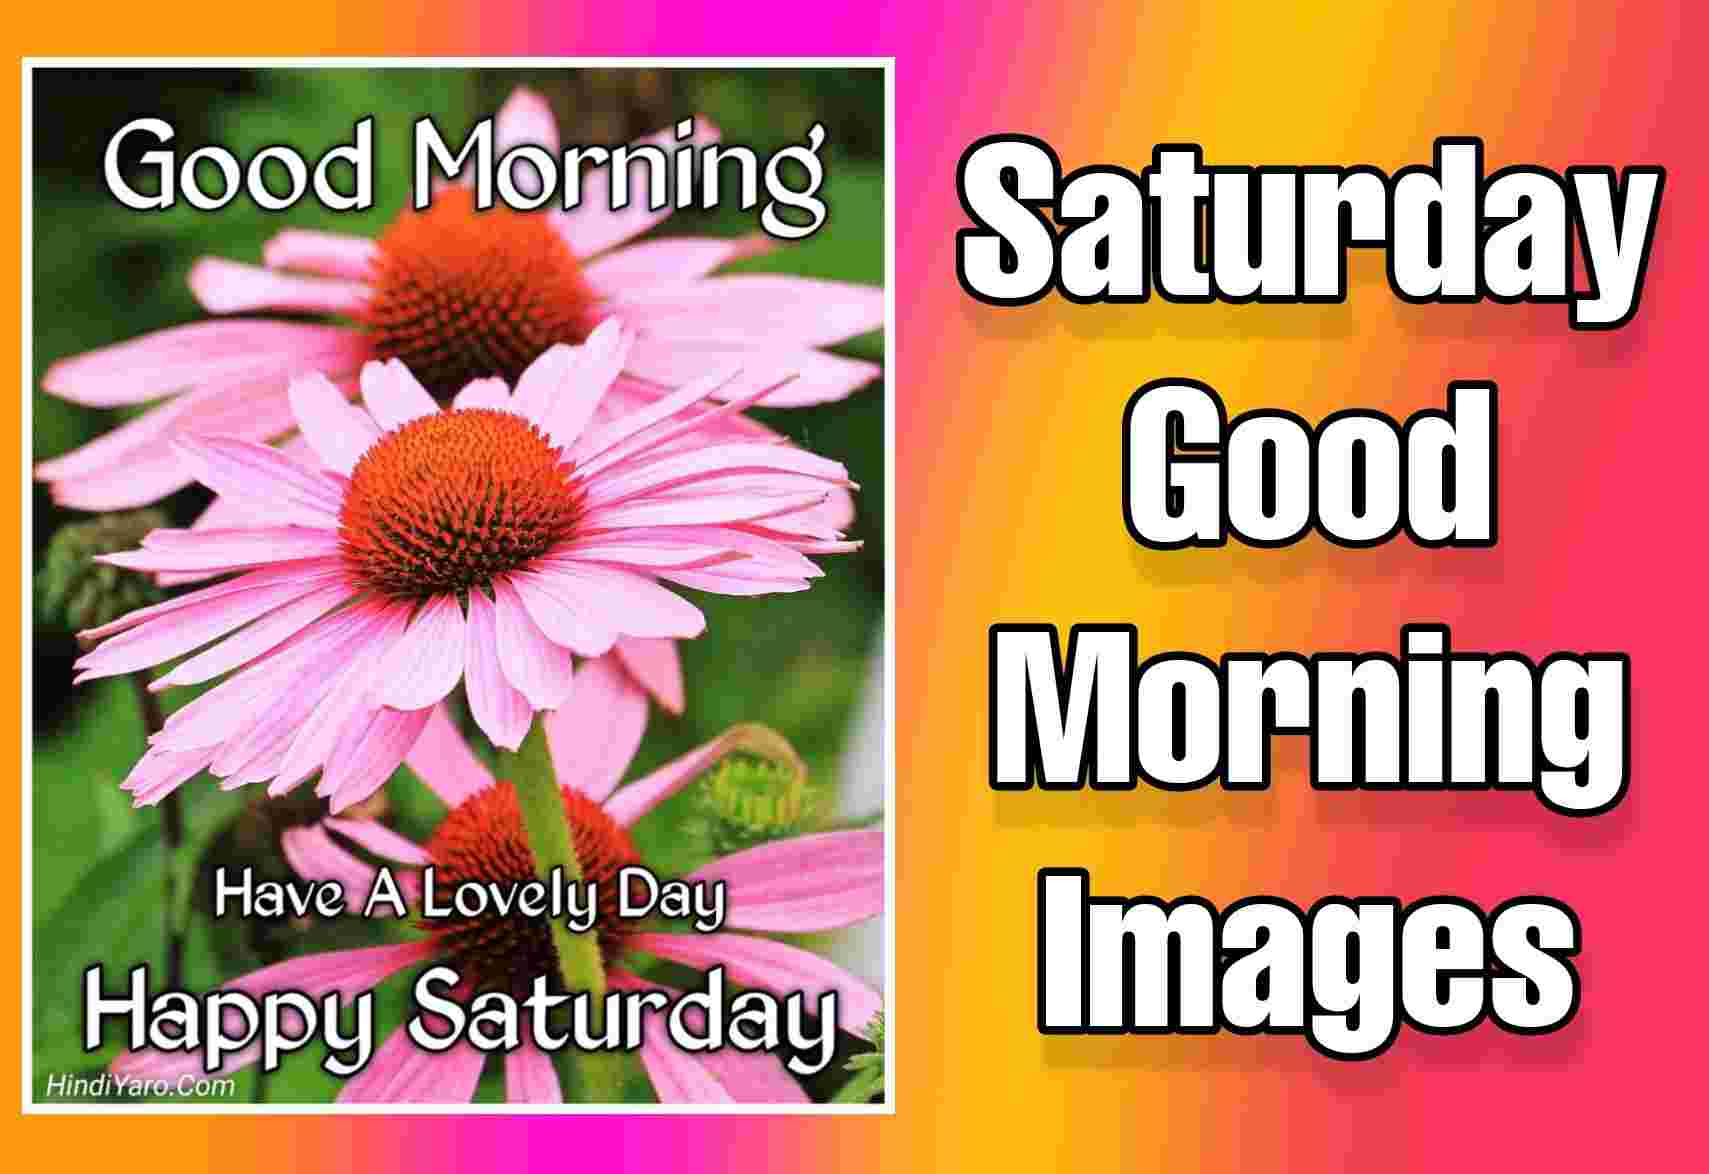 80+ Good Morning Happy Saturday Images - Happy Saturday Images